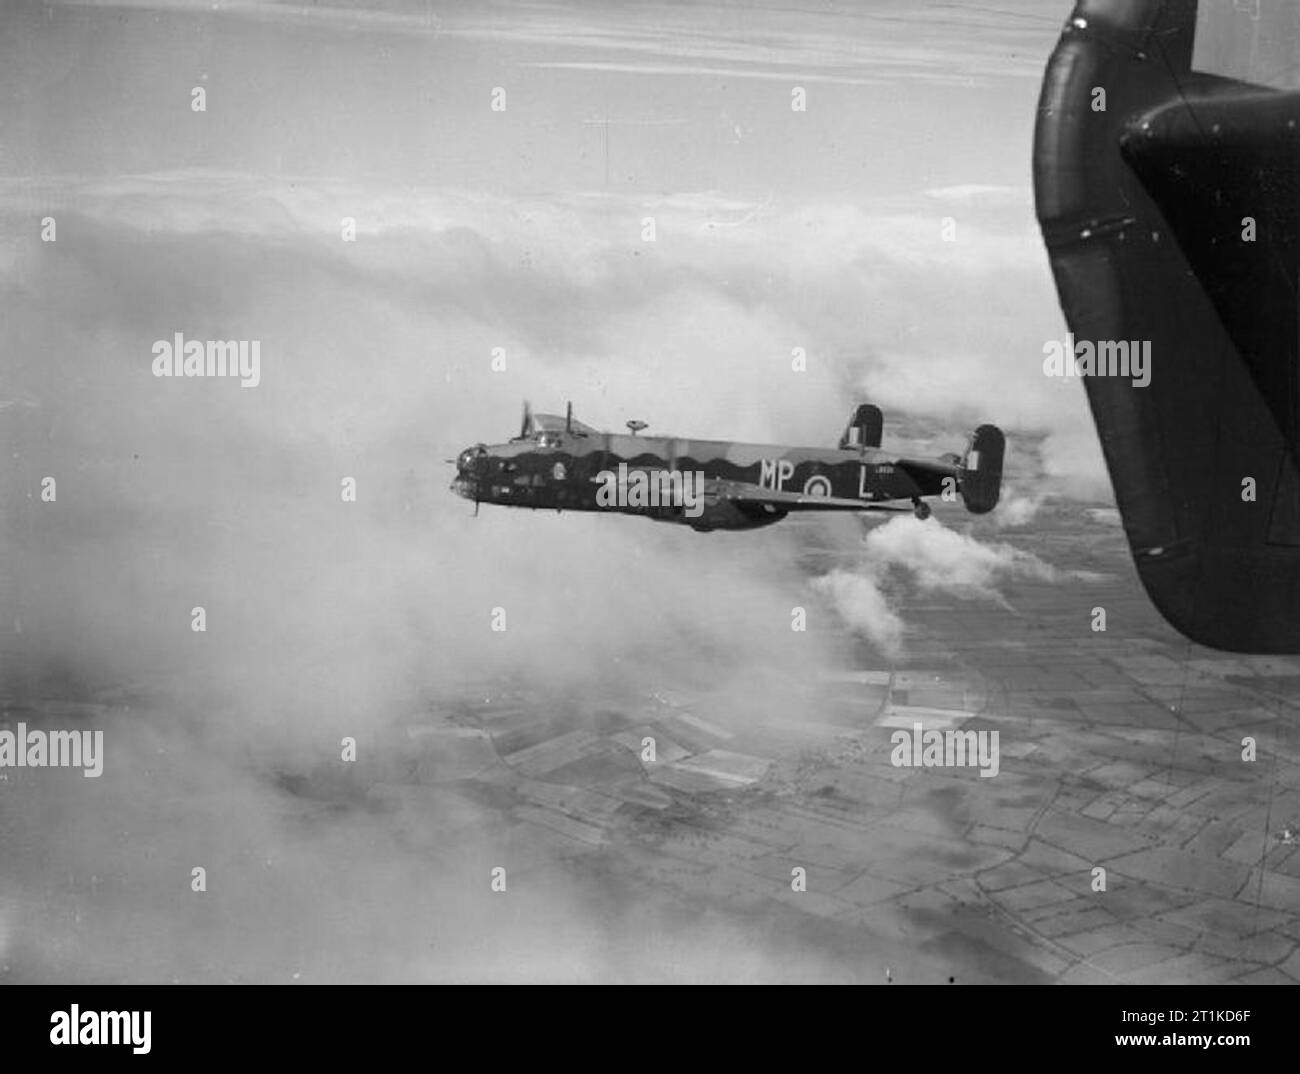 Aircraft of the Royal Air Force 1939-1945- Handley Page Hp.57 Halifax. Halifax Mark I Series 1, L9530 ?MP-L?, of No. 76 Squadron RAF based at Middleton-St-George, County Durham, in flight. Stock Photo